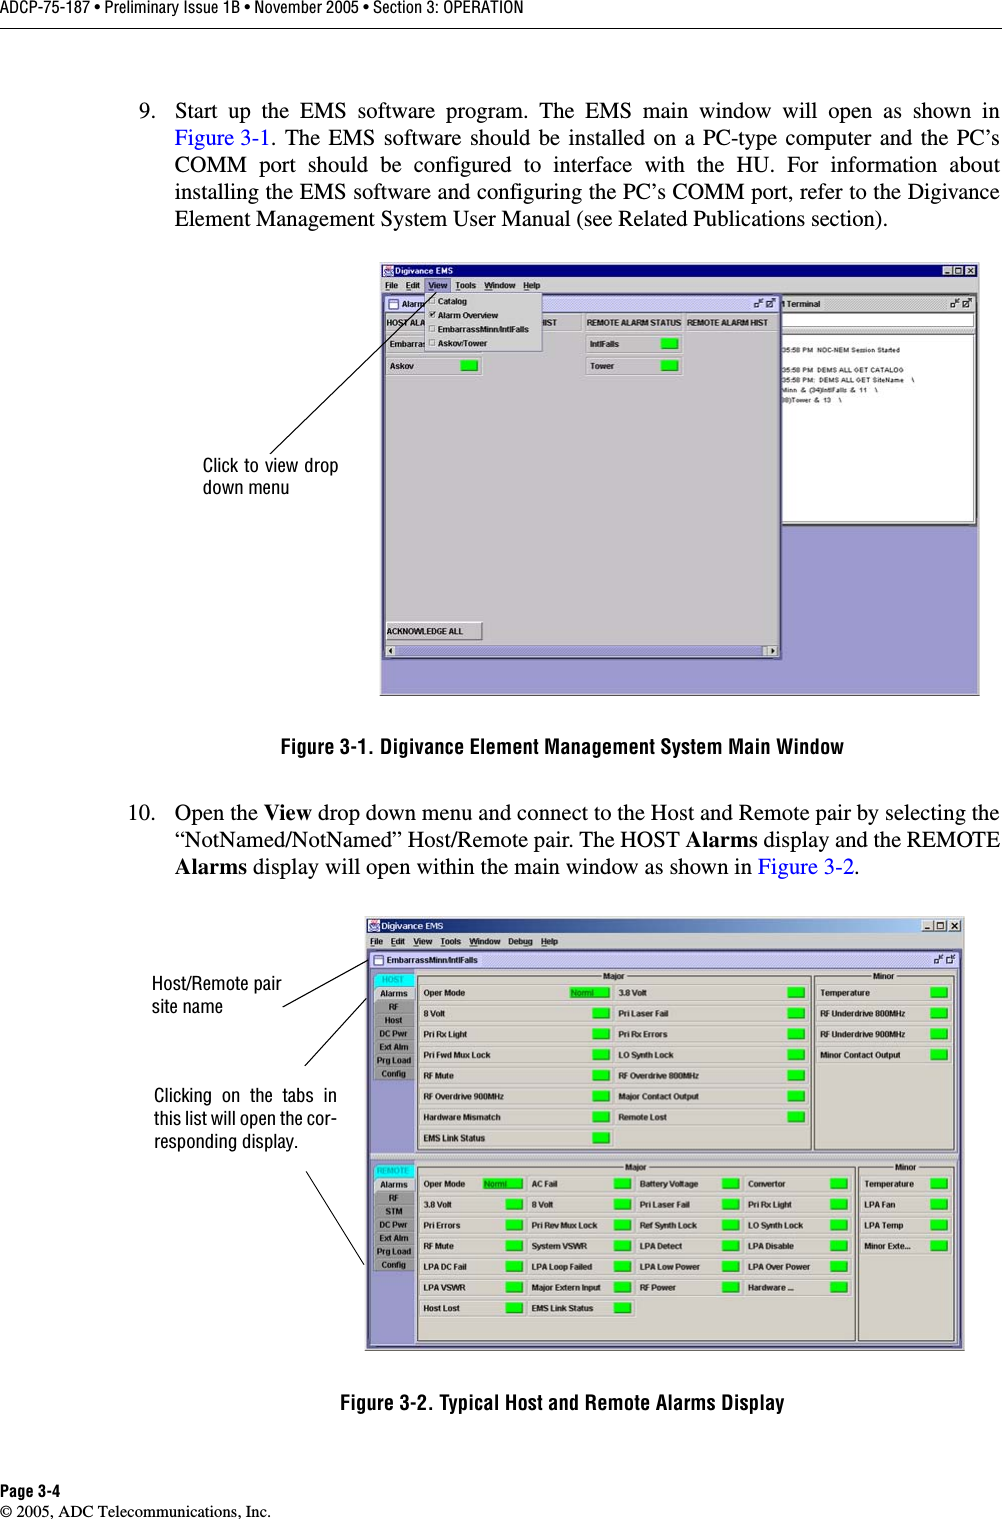 ADCP-75-187 • Preliminary Issue 1B • November 2005 • Section 3: OPERATIONPage 3-4© 2005, ADC Telecommunications, Inc.9. Start up the EMS software program. The EMS main window will open as shown inFigure 3-1. The EMS software should be installed on a PC-type computer and the PC’sCOMM port should be configured to interface with the HU. For information aboutinstalling the EMS software and configuring the PC’s COMM port, refer to the DigivanceElement Management System User Manual (see Related Publications section). Figure 3-1. Digivance Element Management System Main Window10. Open the View drop down menu and connect to the Host and Remote pair by selecting the“NotNamed/NotNamed” Host/Remote pair. The HOST Alarms display and the REMOTEAlarms display will open within the main window as shown in Figure 3-2. Figure 3-2. Typical Host and Remote Alarms DisplayClick to view dropdown menuClicking on the tabs inthis list will open the cor-responding display.Host/Remote pairsite name